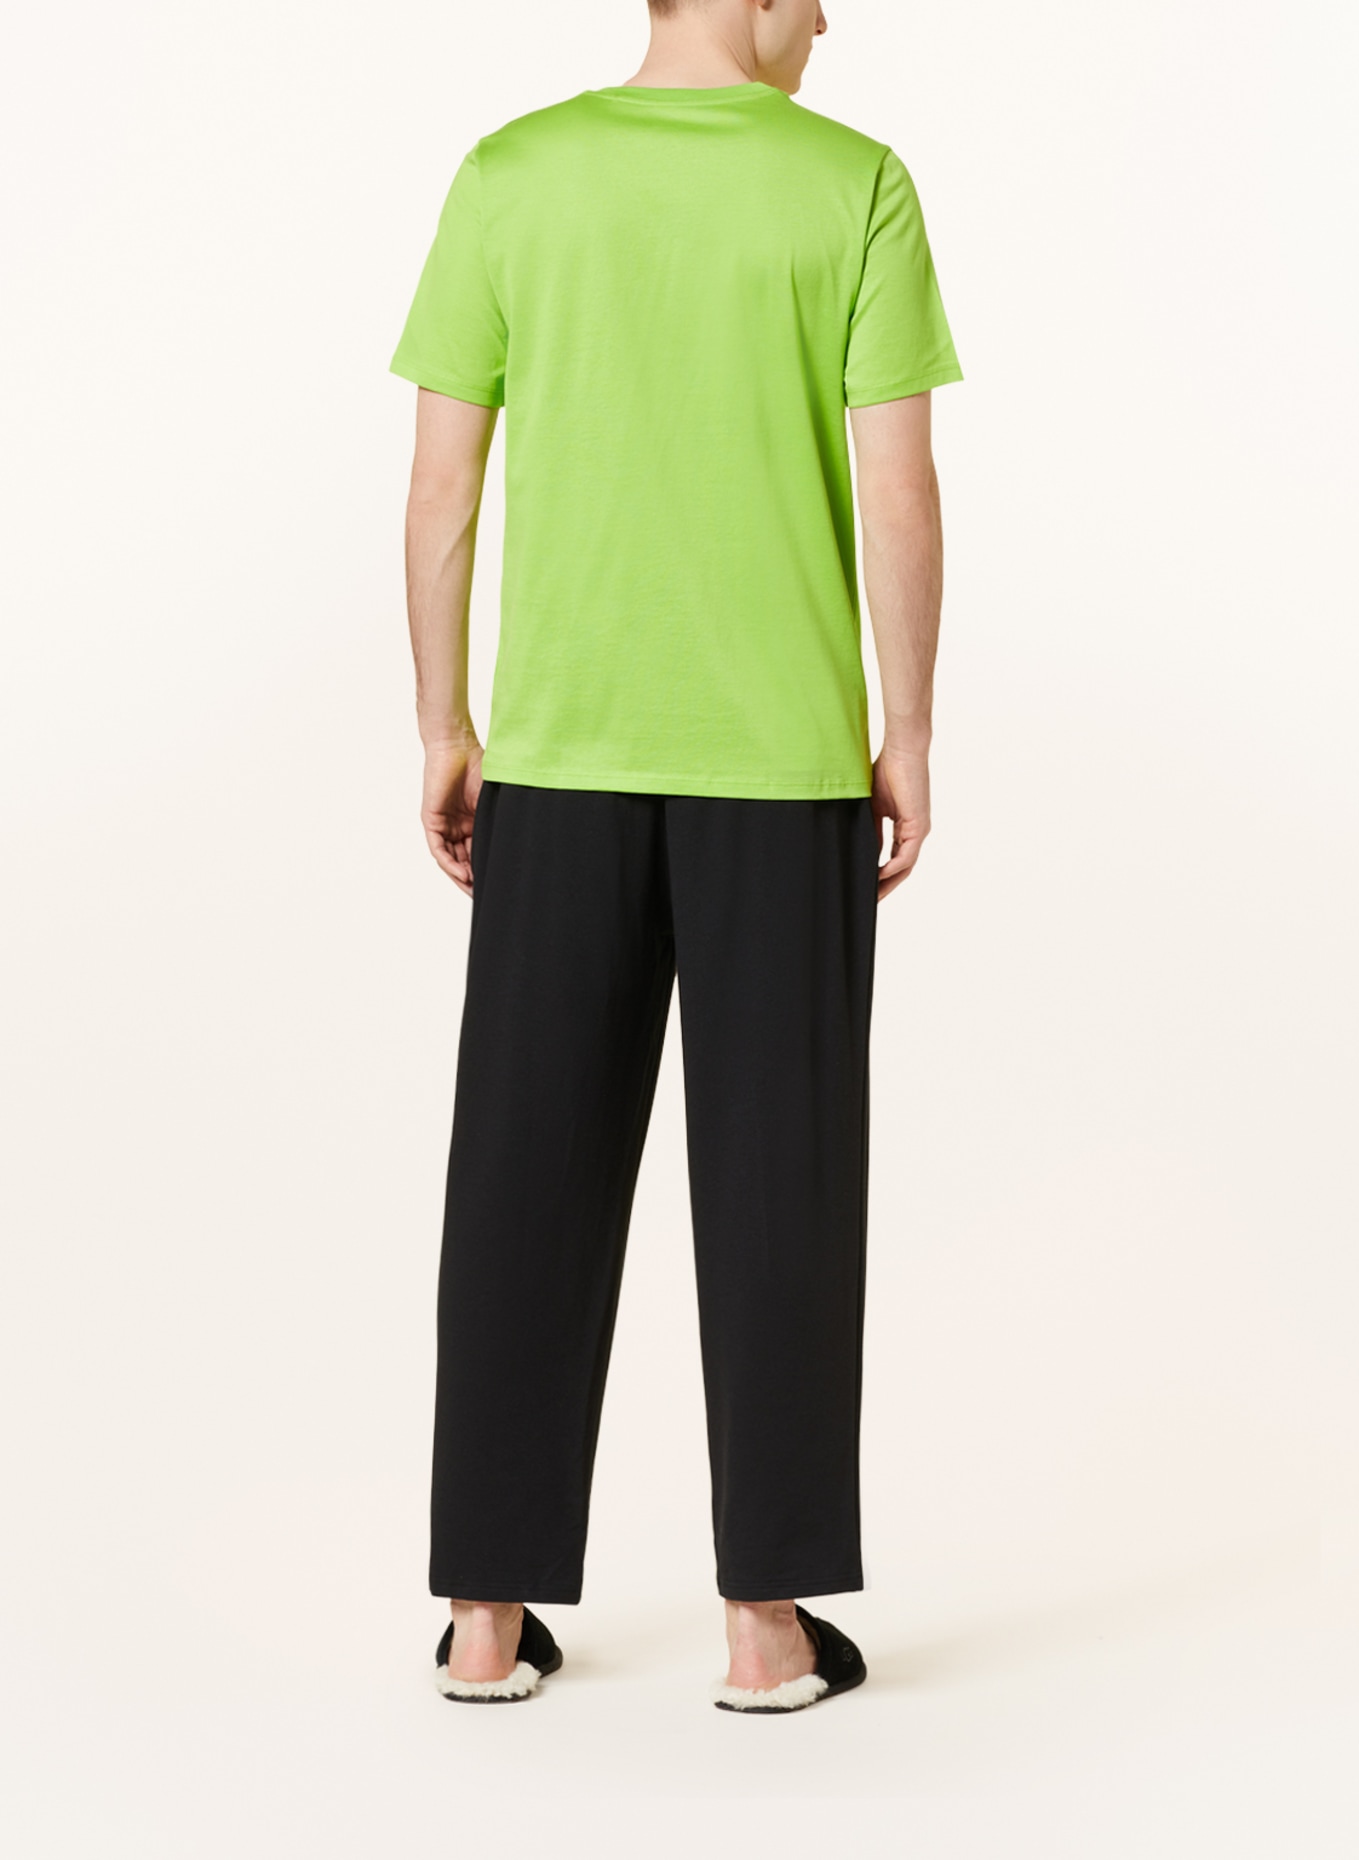 SCHIESSER Pajama shirt MIX+RELAX, Color: NEON GREEN (Image 3)